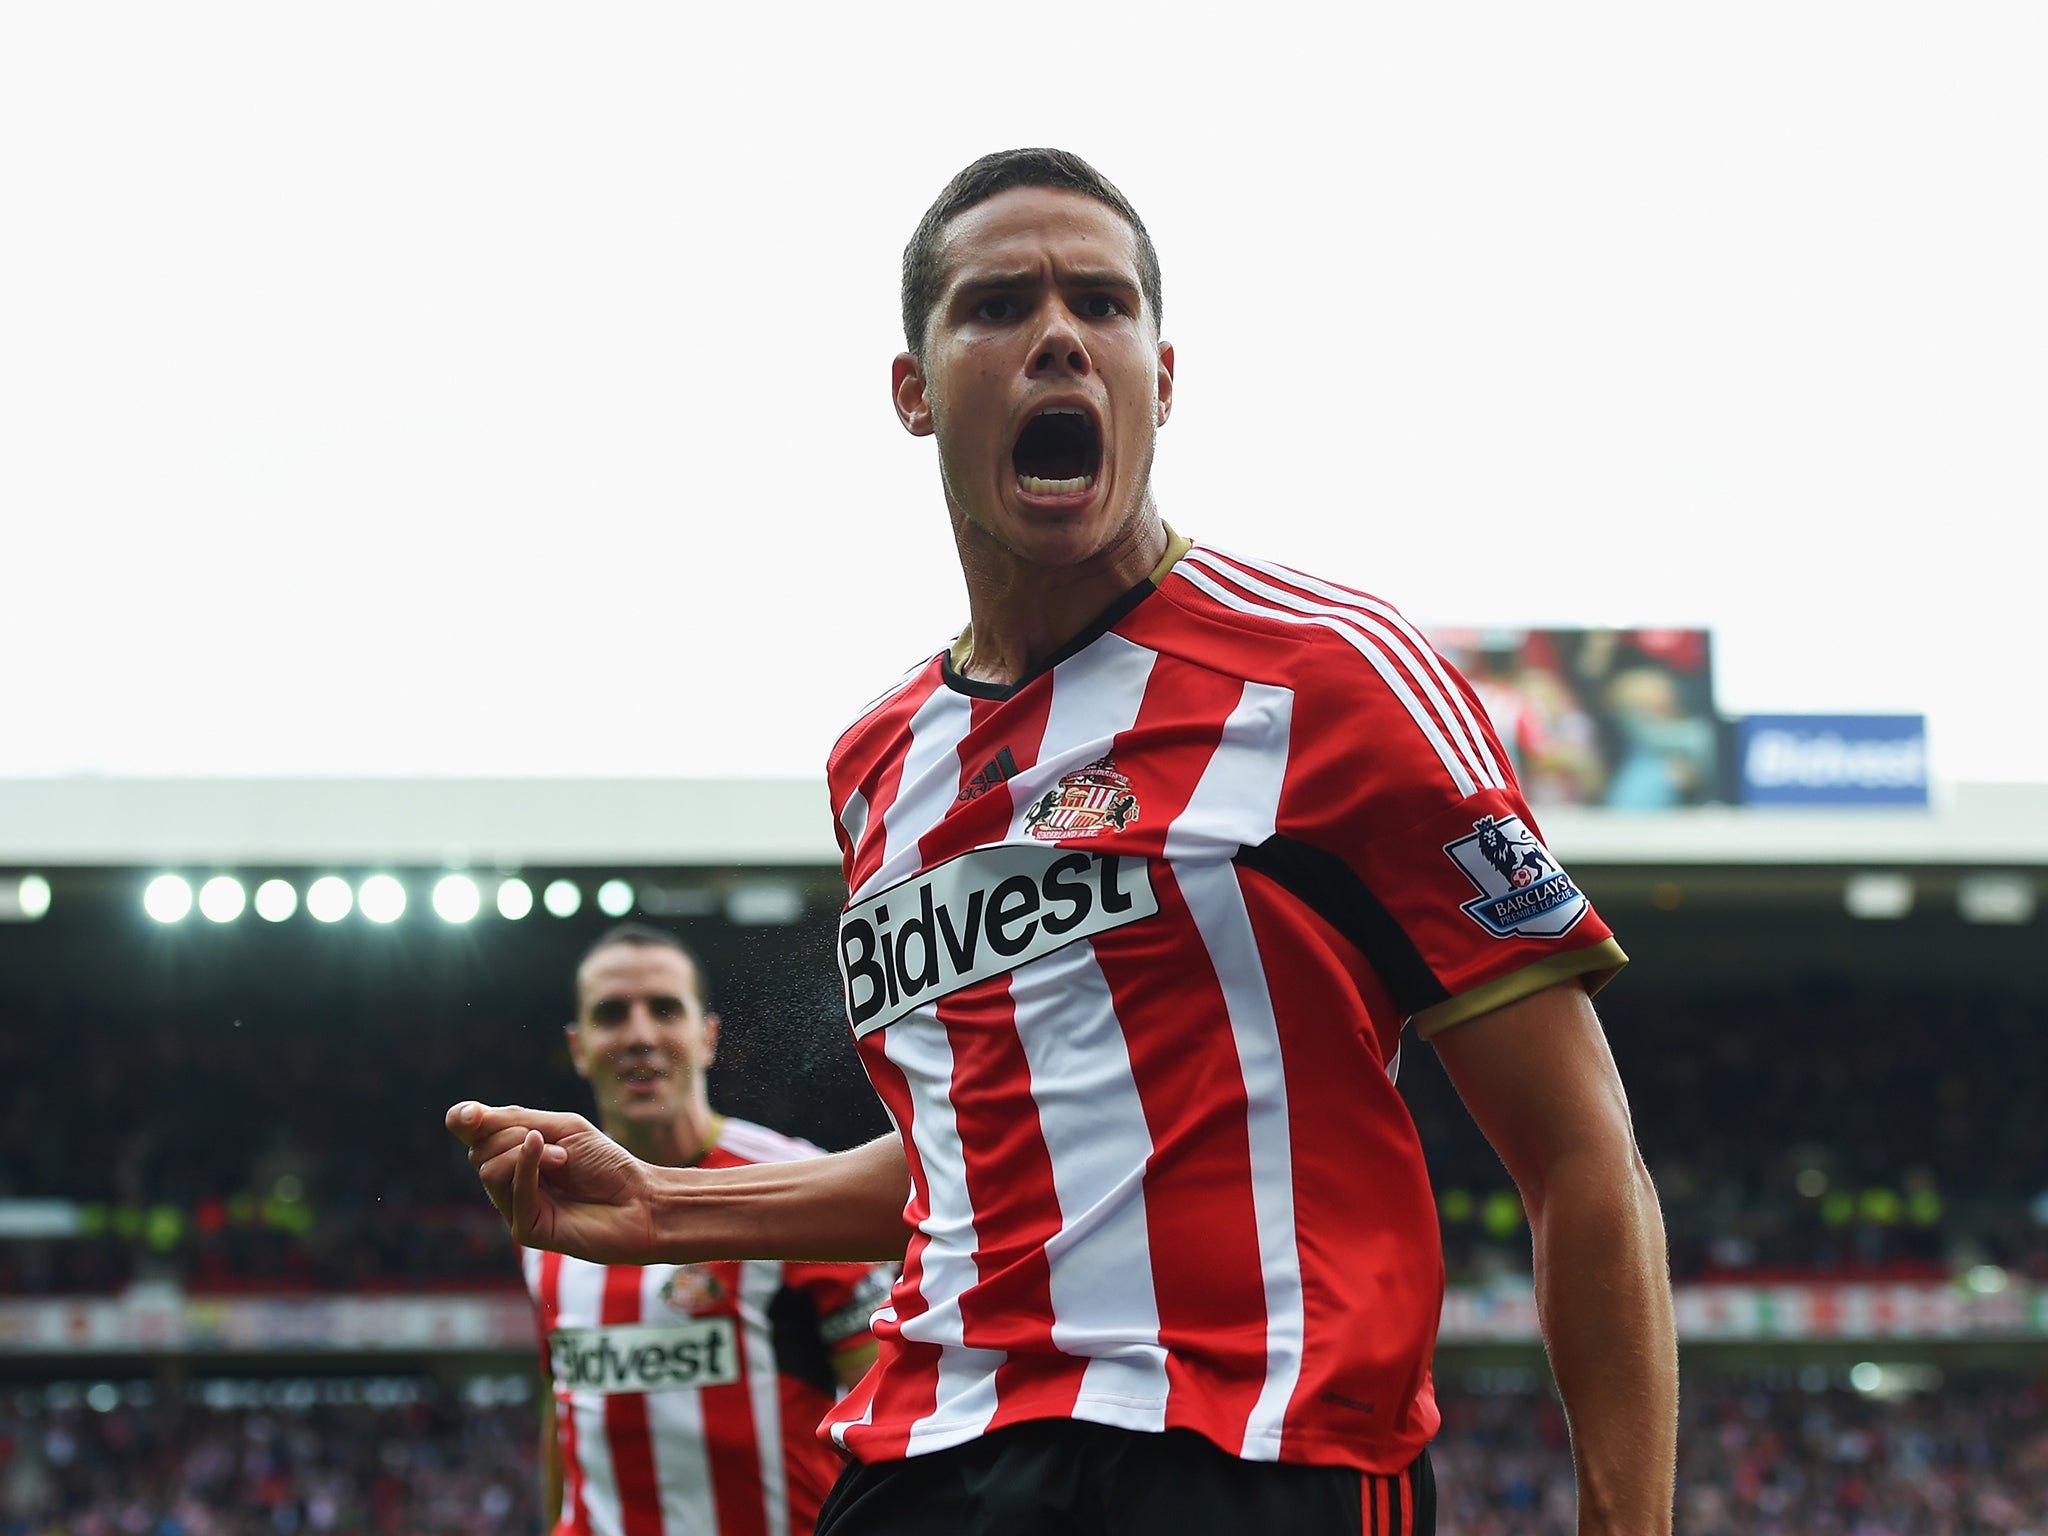 Jack Rodwell of Sunderland celebrates scoring his goal during the Premier League match between Sunderland and Manchester United